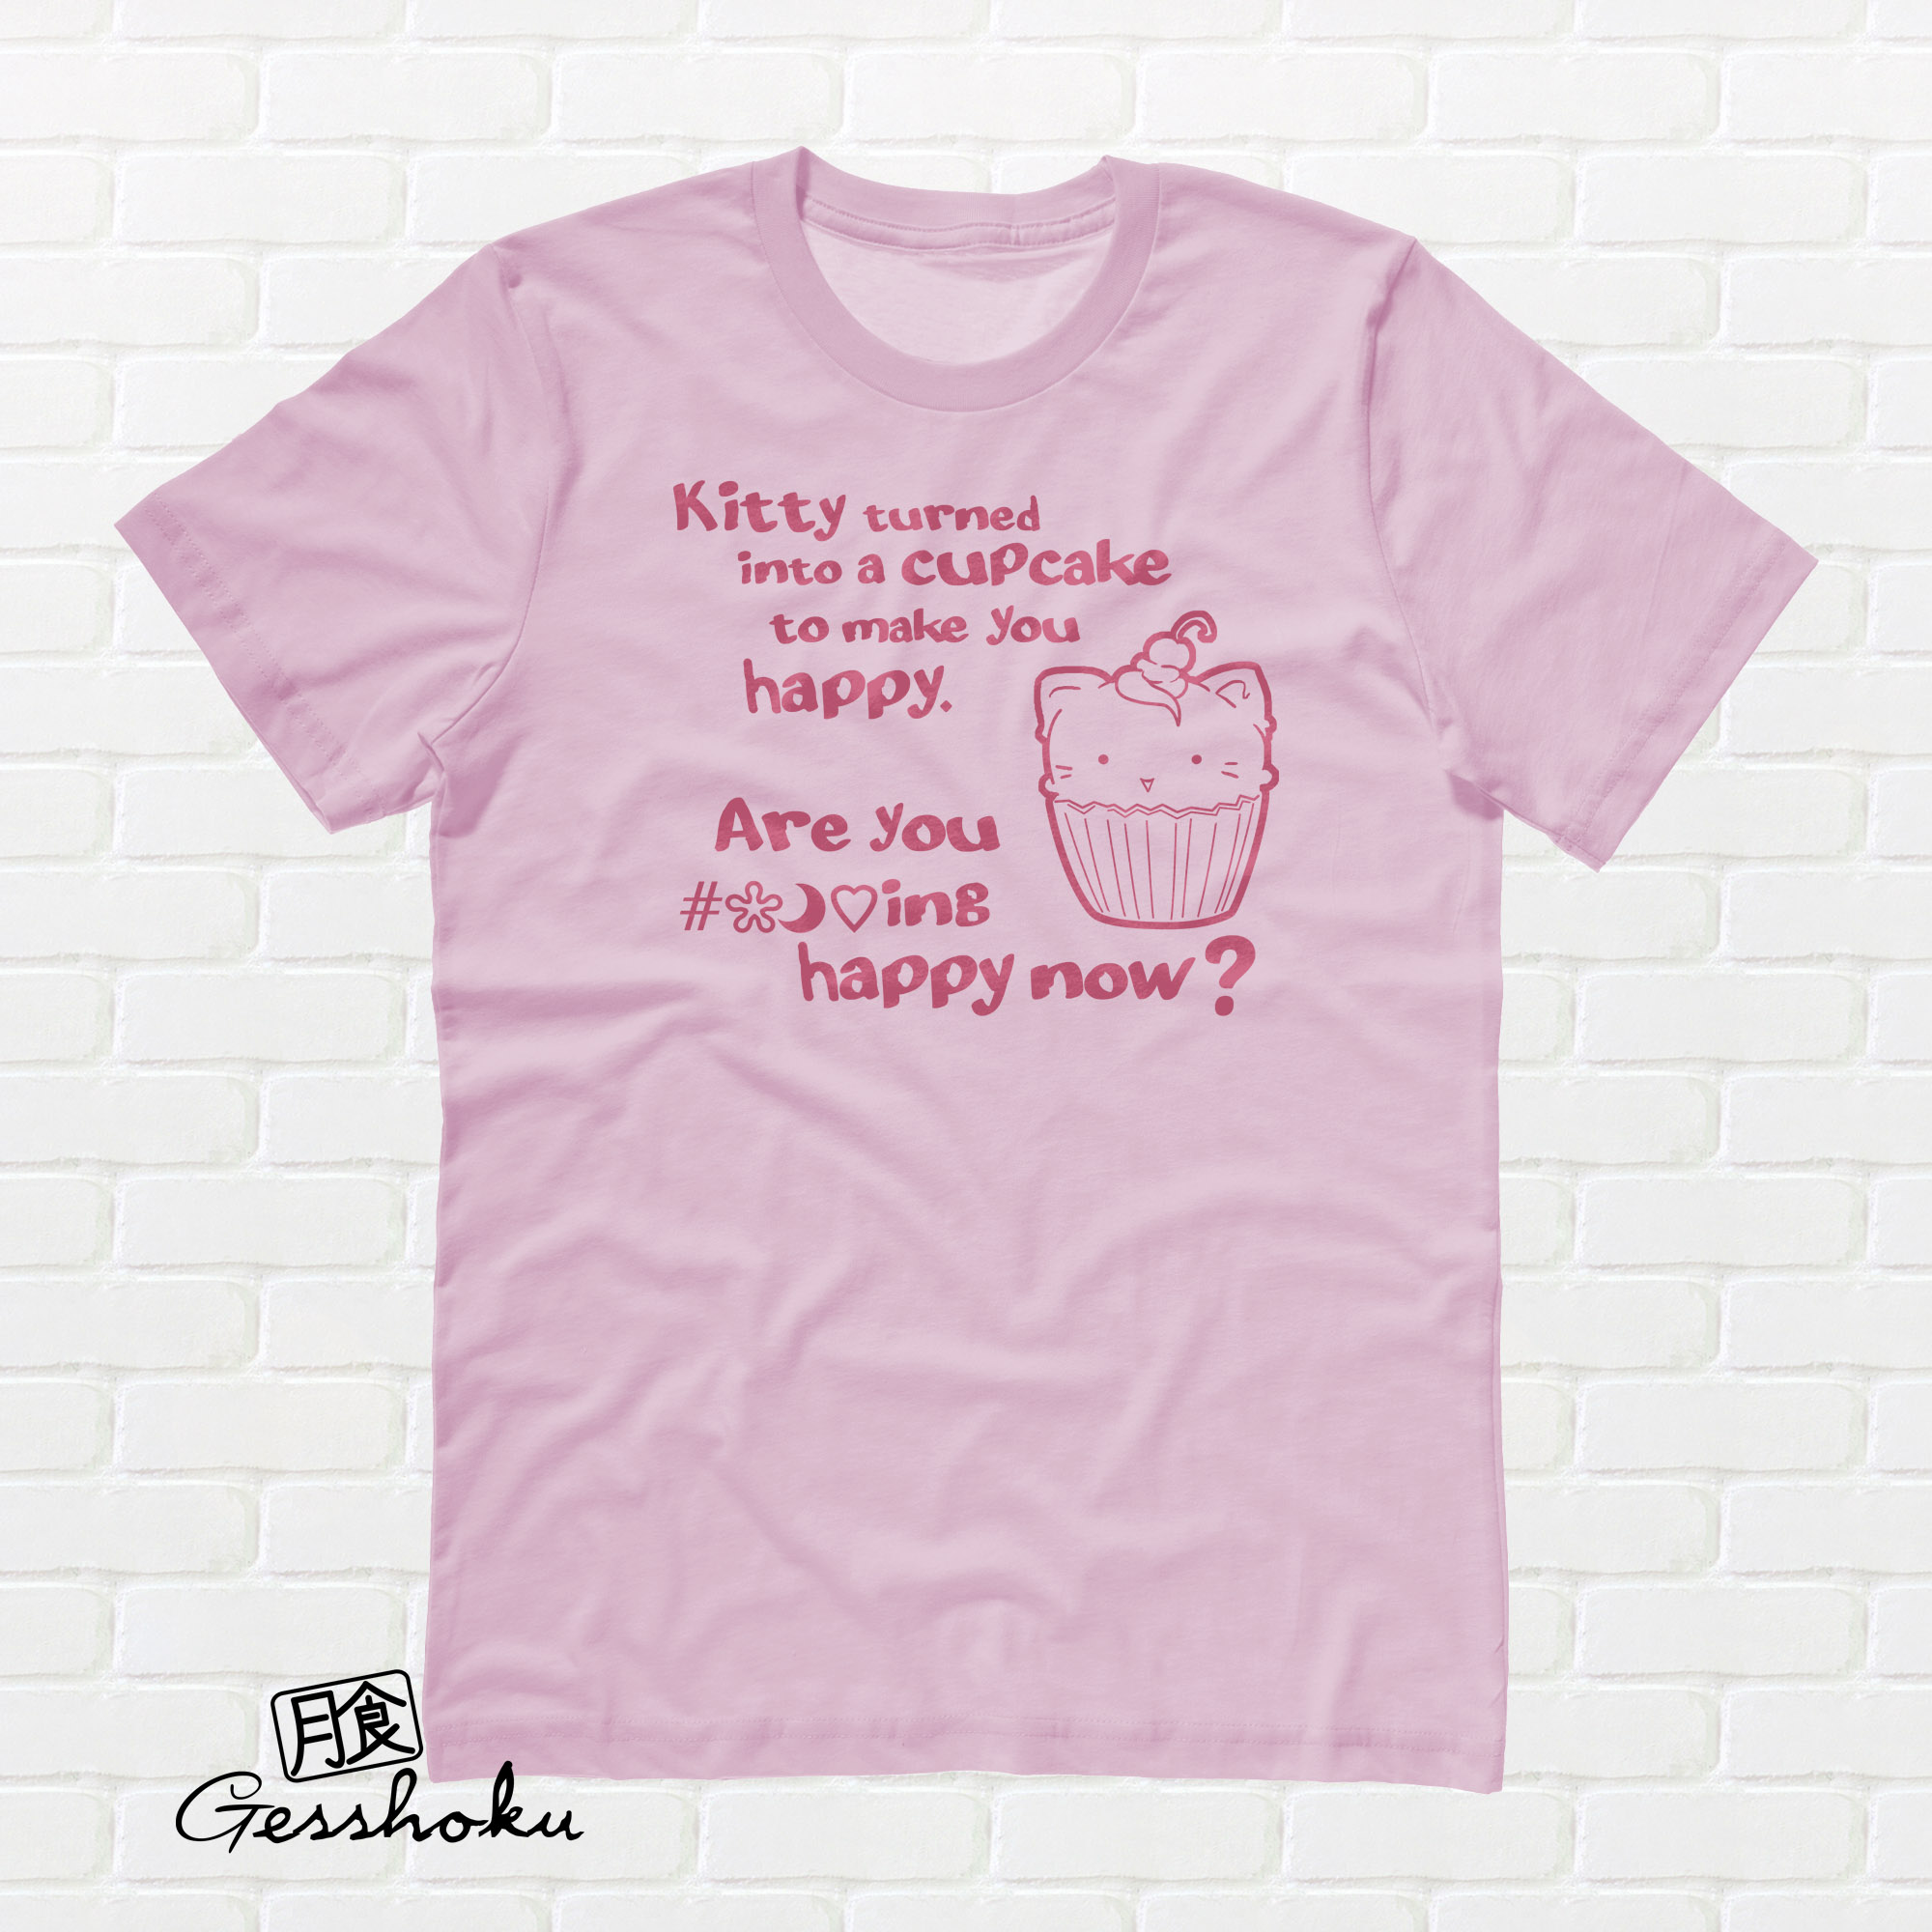 Kitty Turned into a Cupcake T-shirt - Light Pink